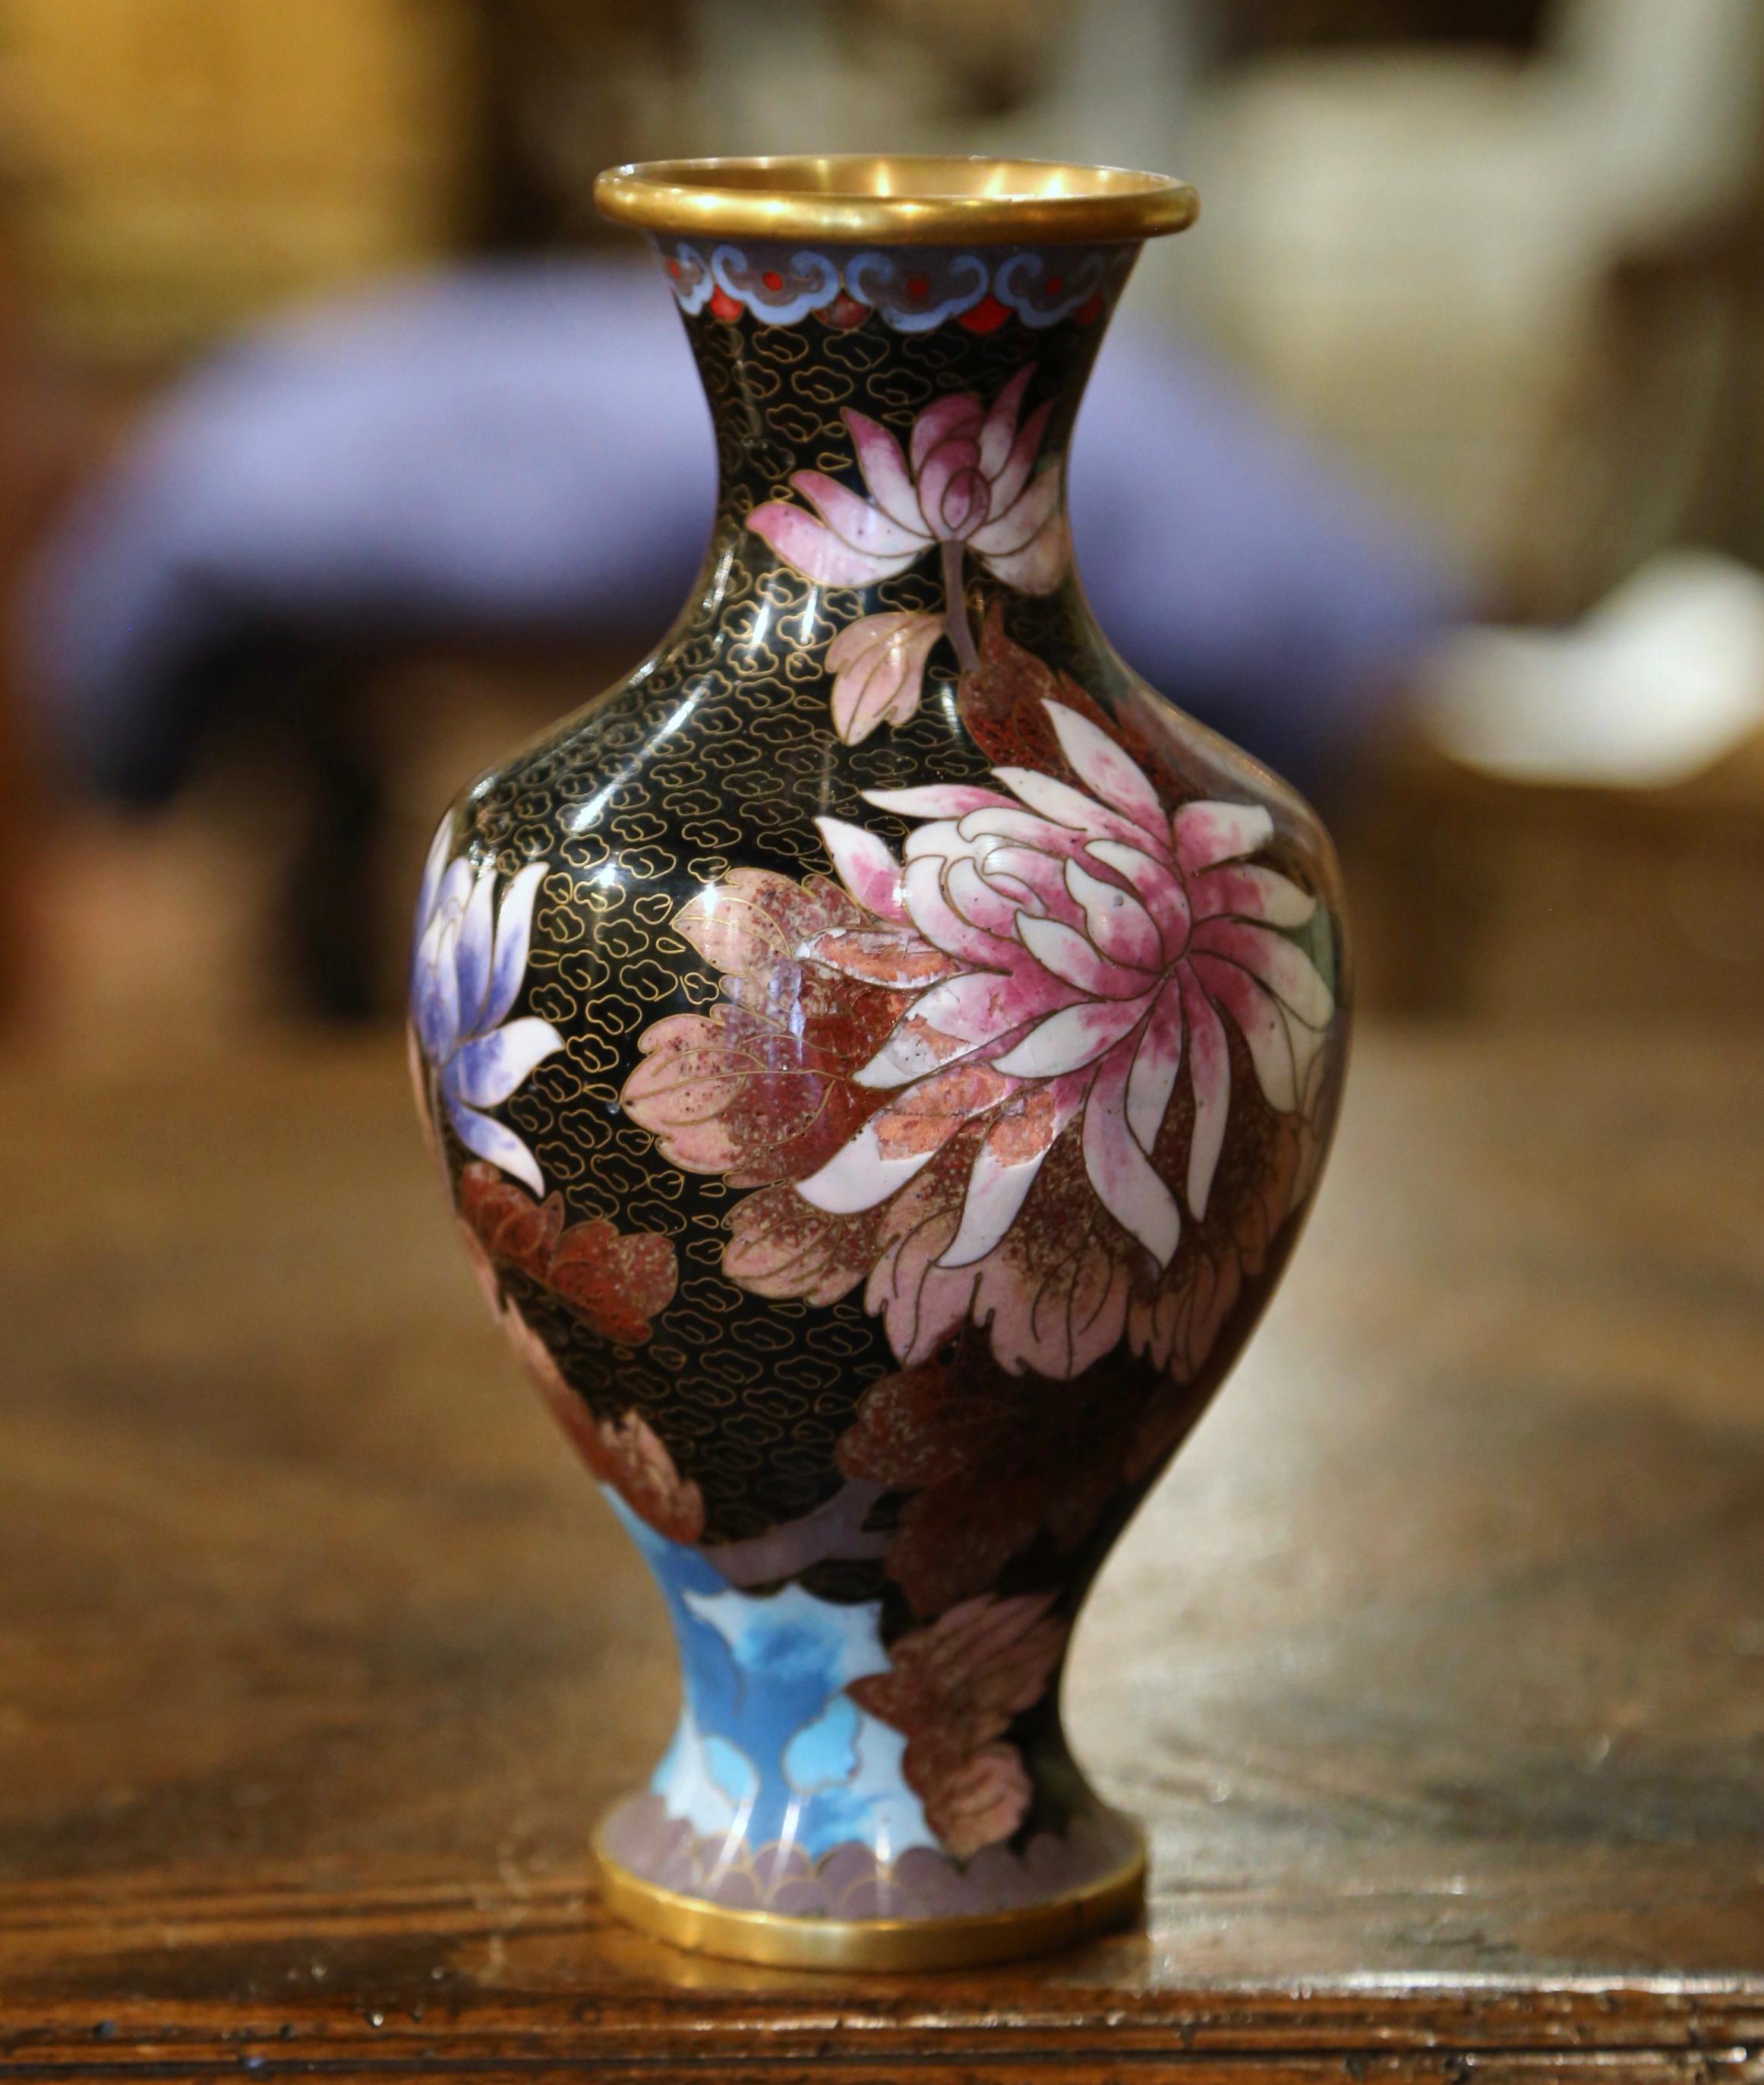 20th Century  Vintage Chinese Cloisonne Enamel Vase with Floral and Leaf Motifs  For Sale